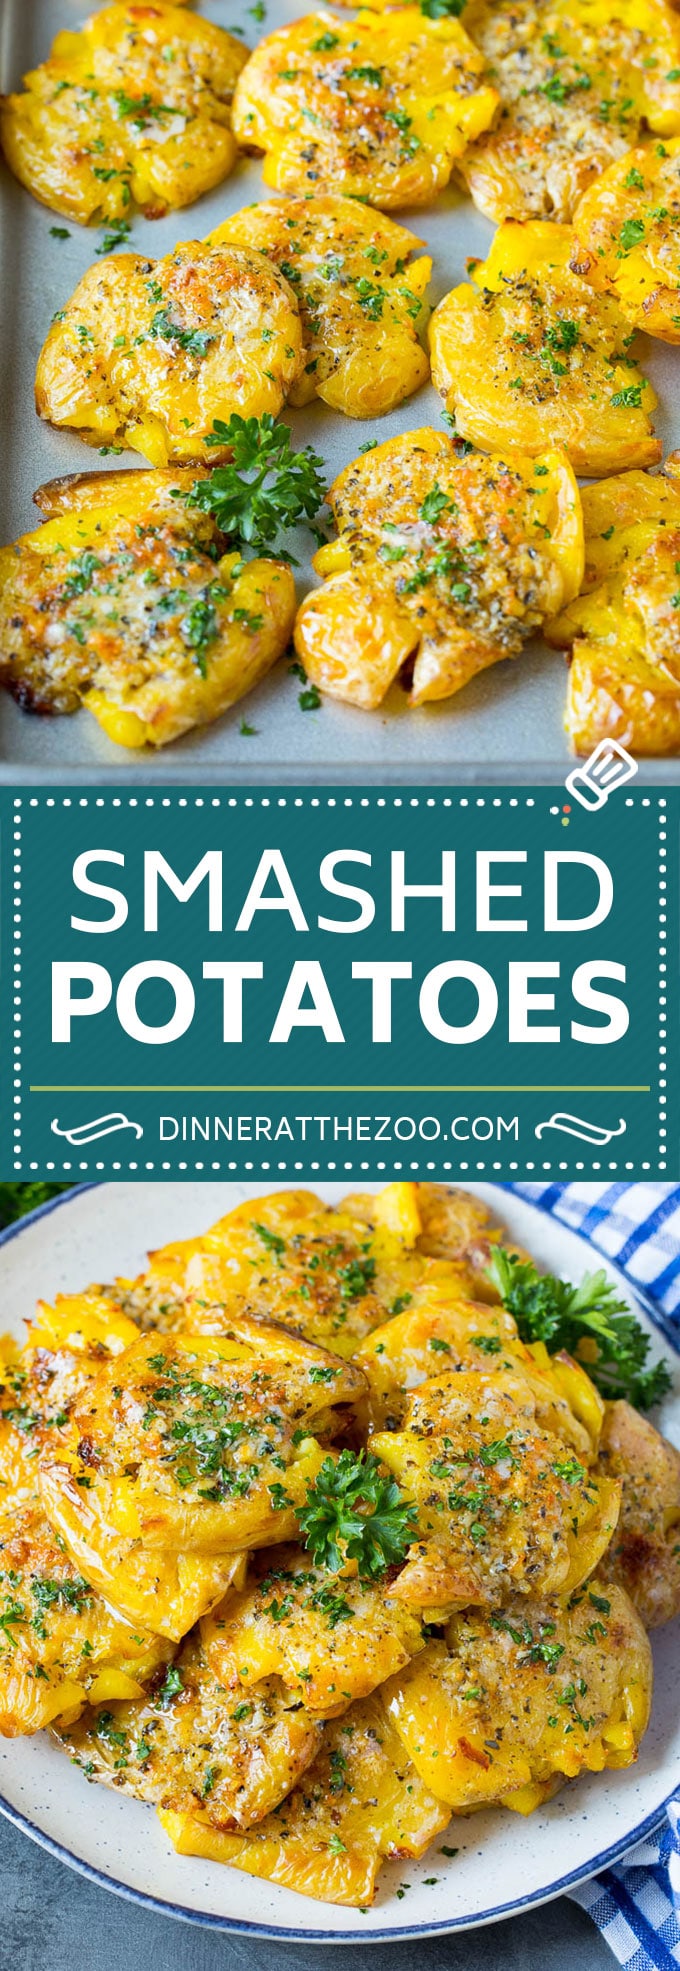 These smashed potatoes are baby potatoes that are boiled until tender, then smashed flat, topped with garlic and herb butter, and roasted until crispy and browned.